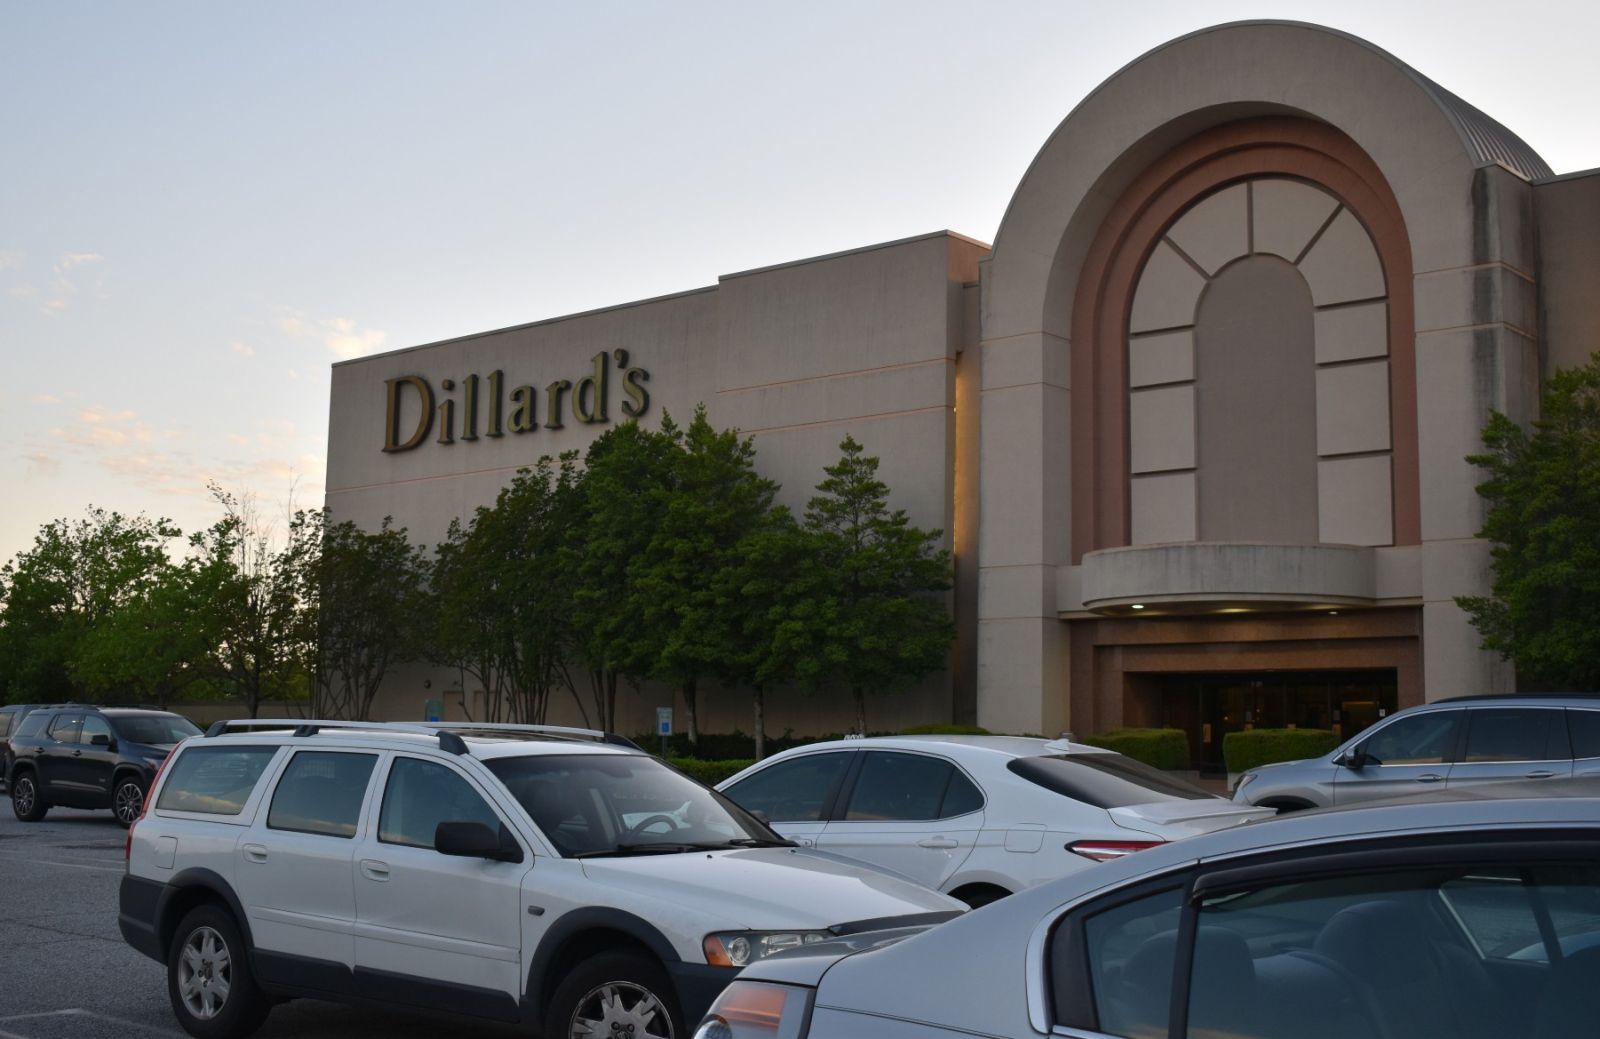 Even on a Tuesday night past closing time at Dillard's in Greenville's Haywood Mall, dozens of cars were parked near the entrance to the store, as shoppers rushed home with their bags. (Photo/Molly Hulsey)